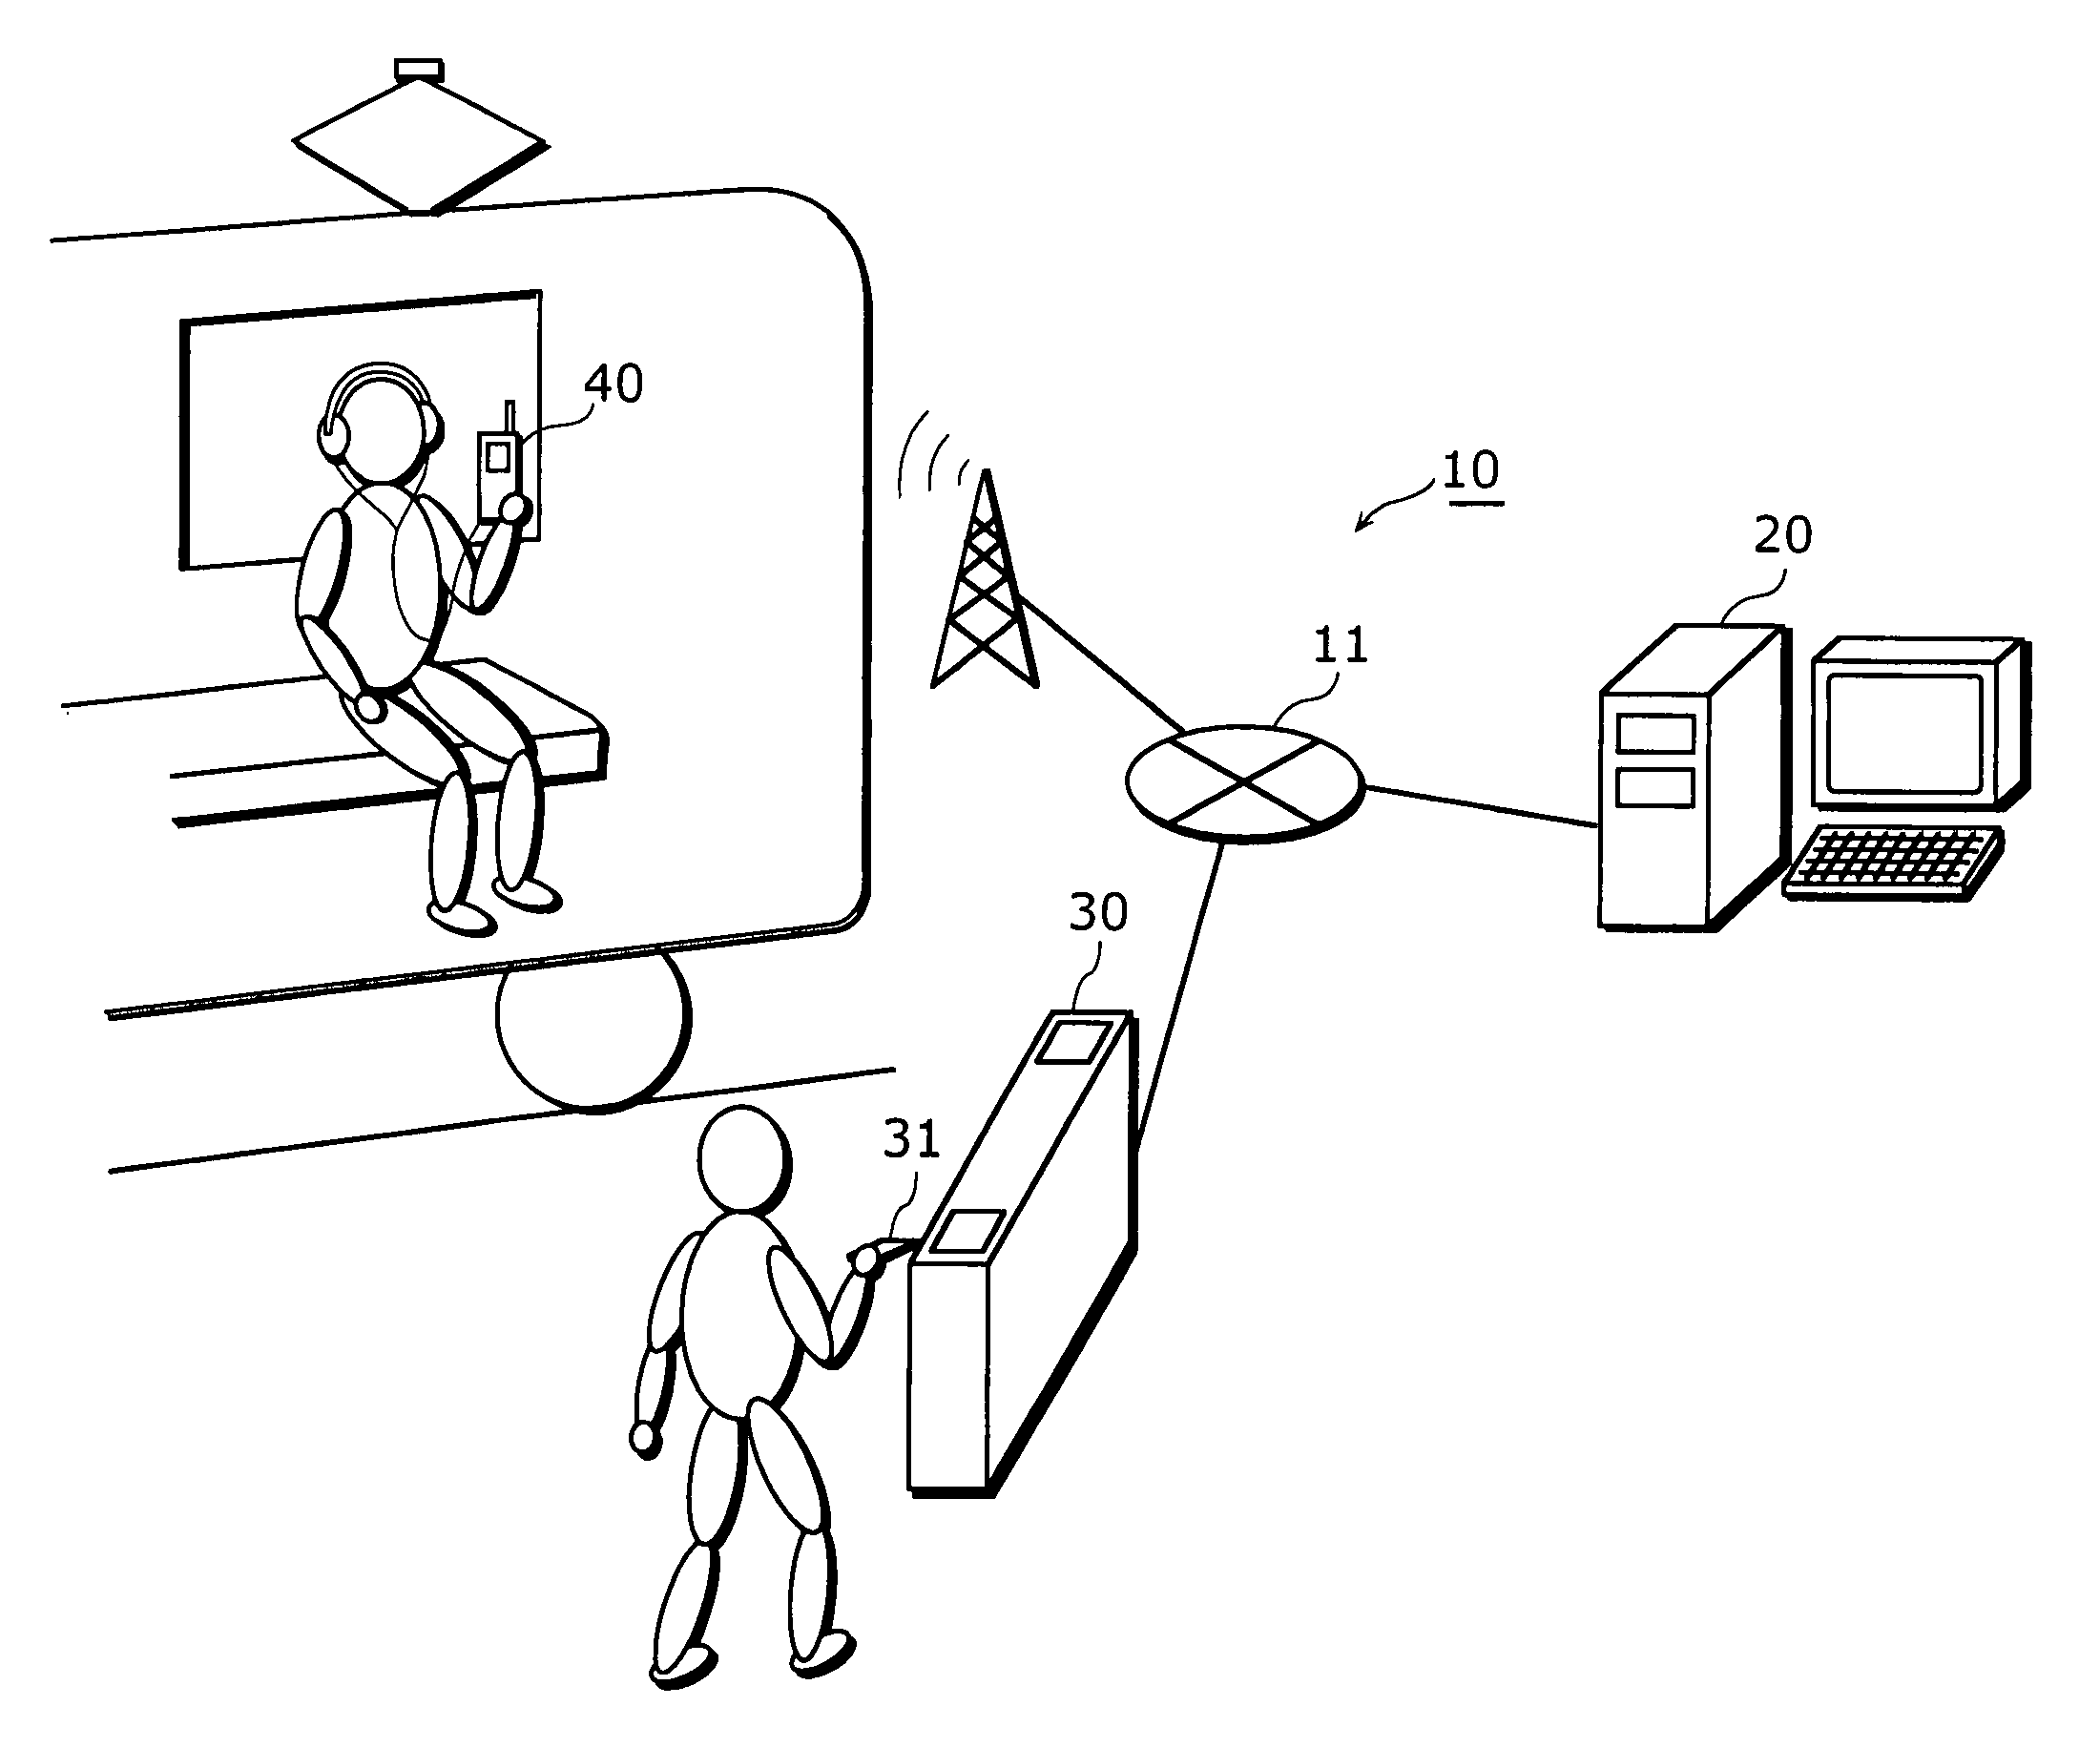 Content delivery apparatus and content reproduction apparatus